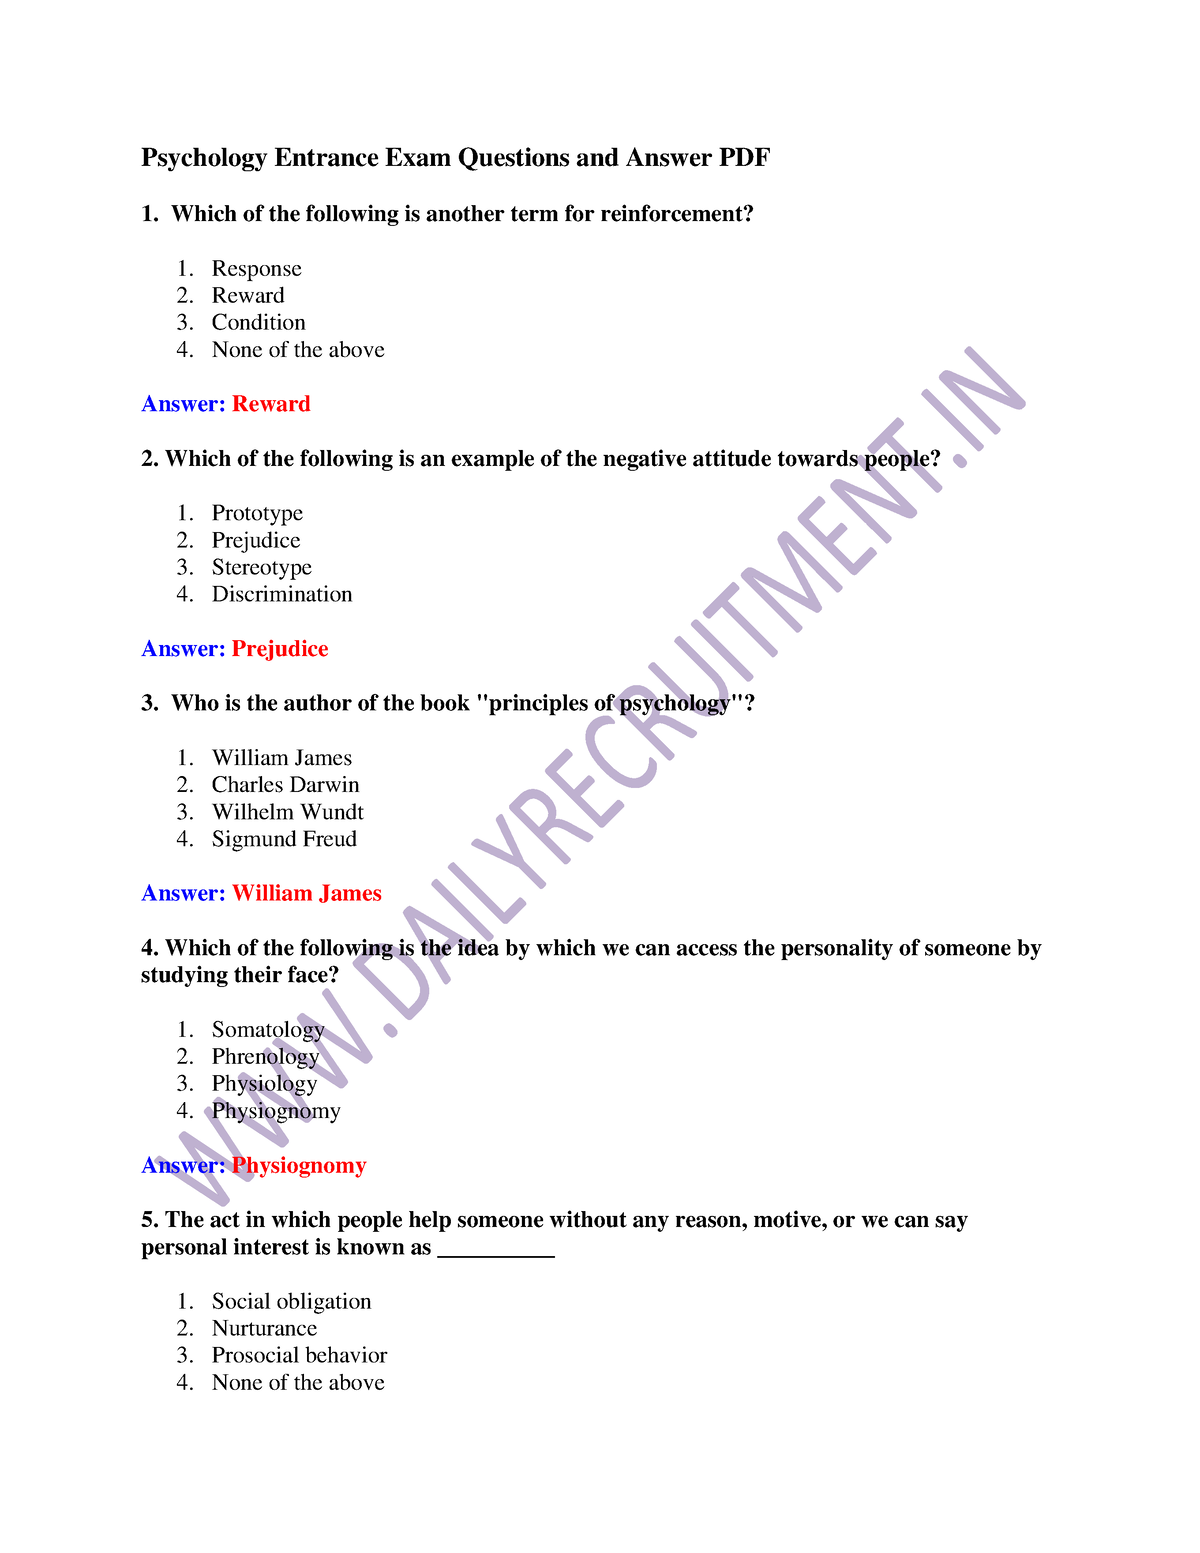 psychology research methods exam questions and answers